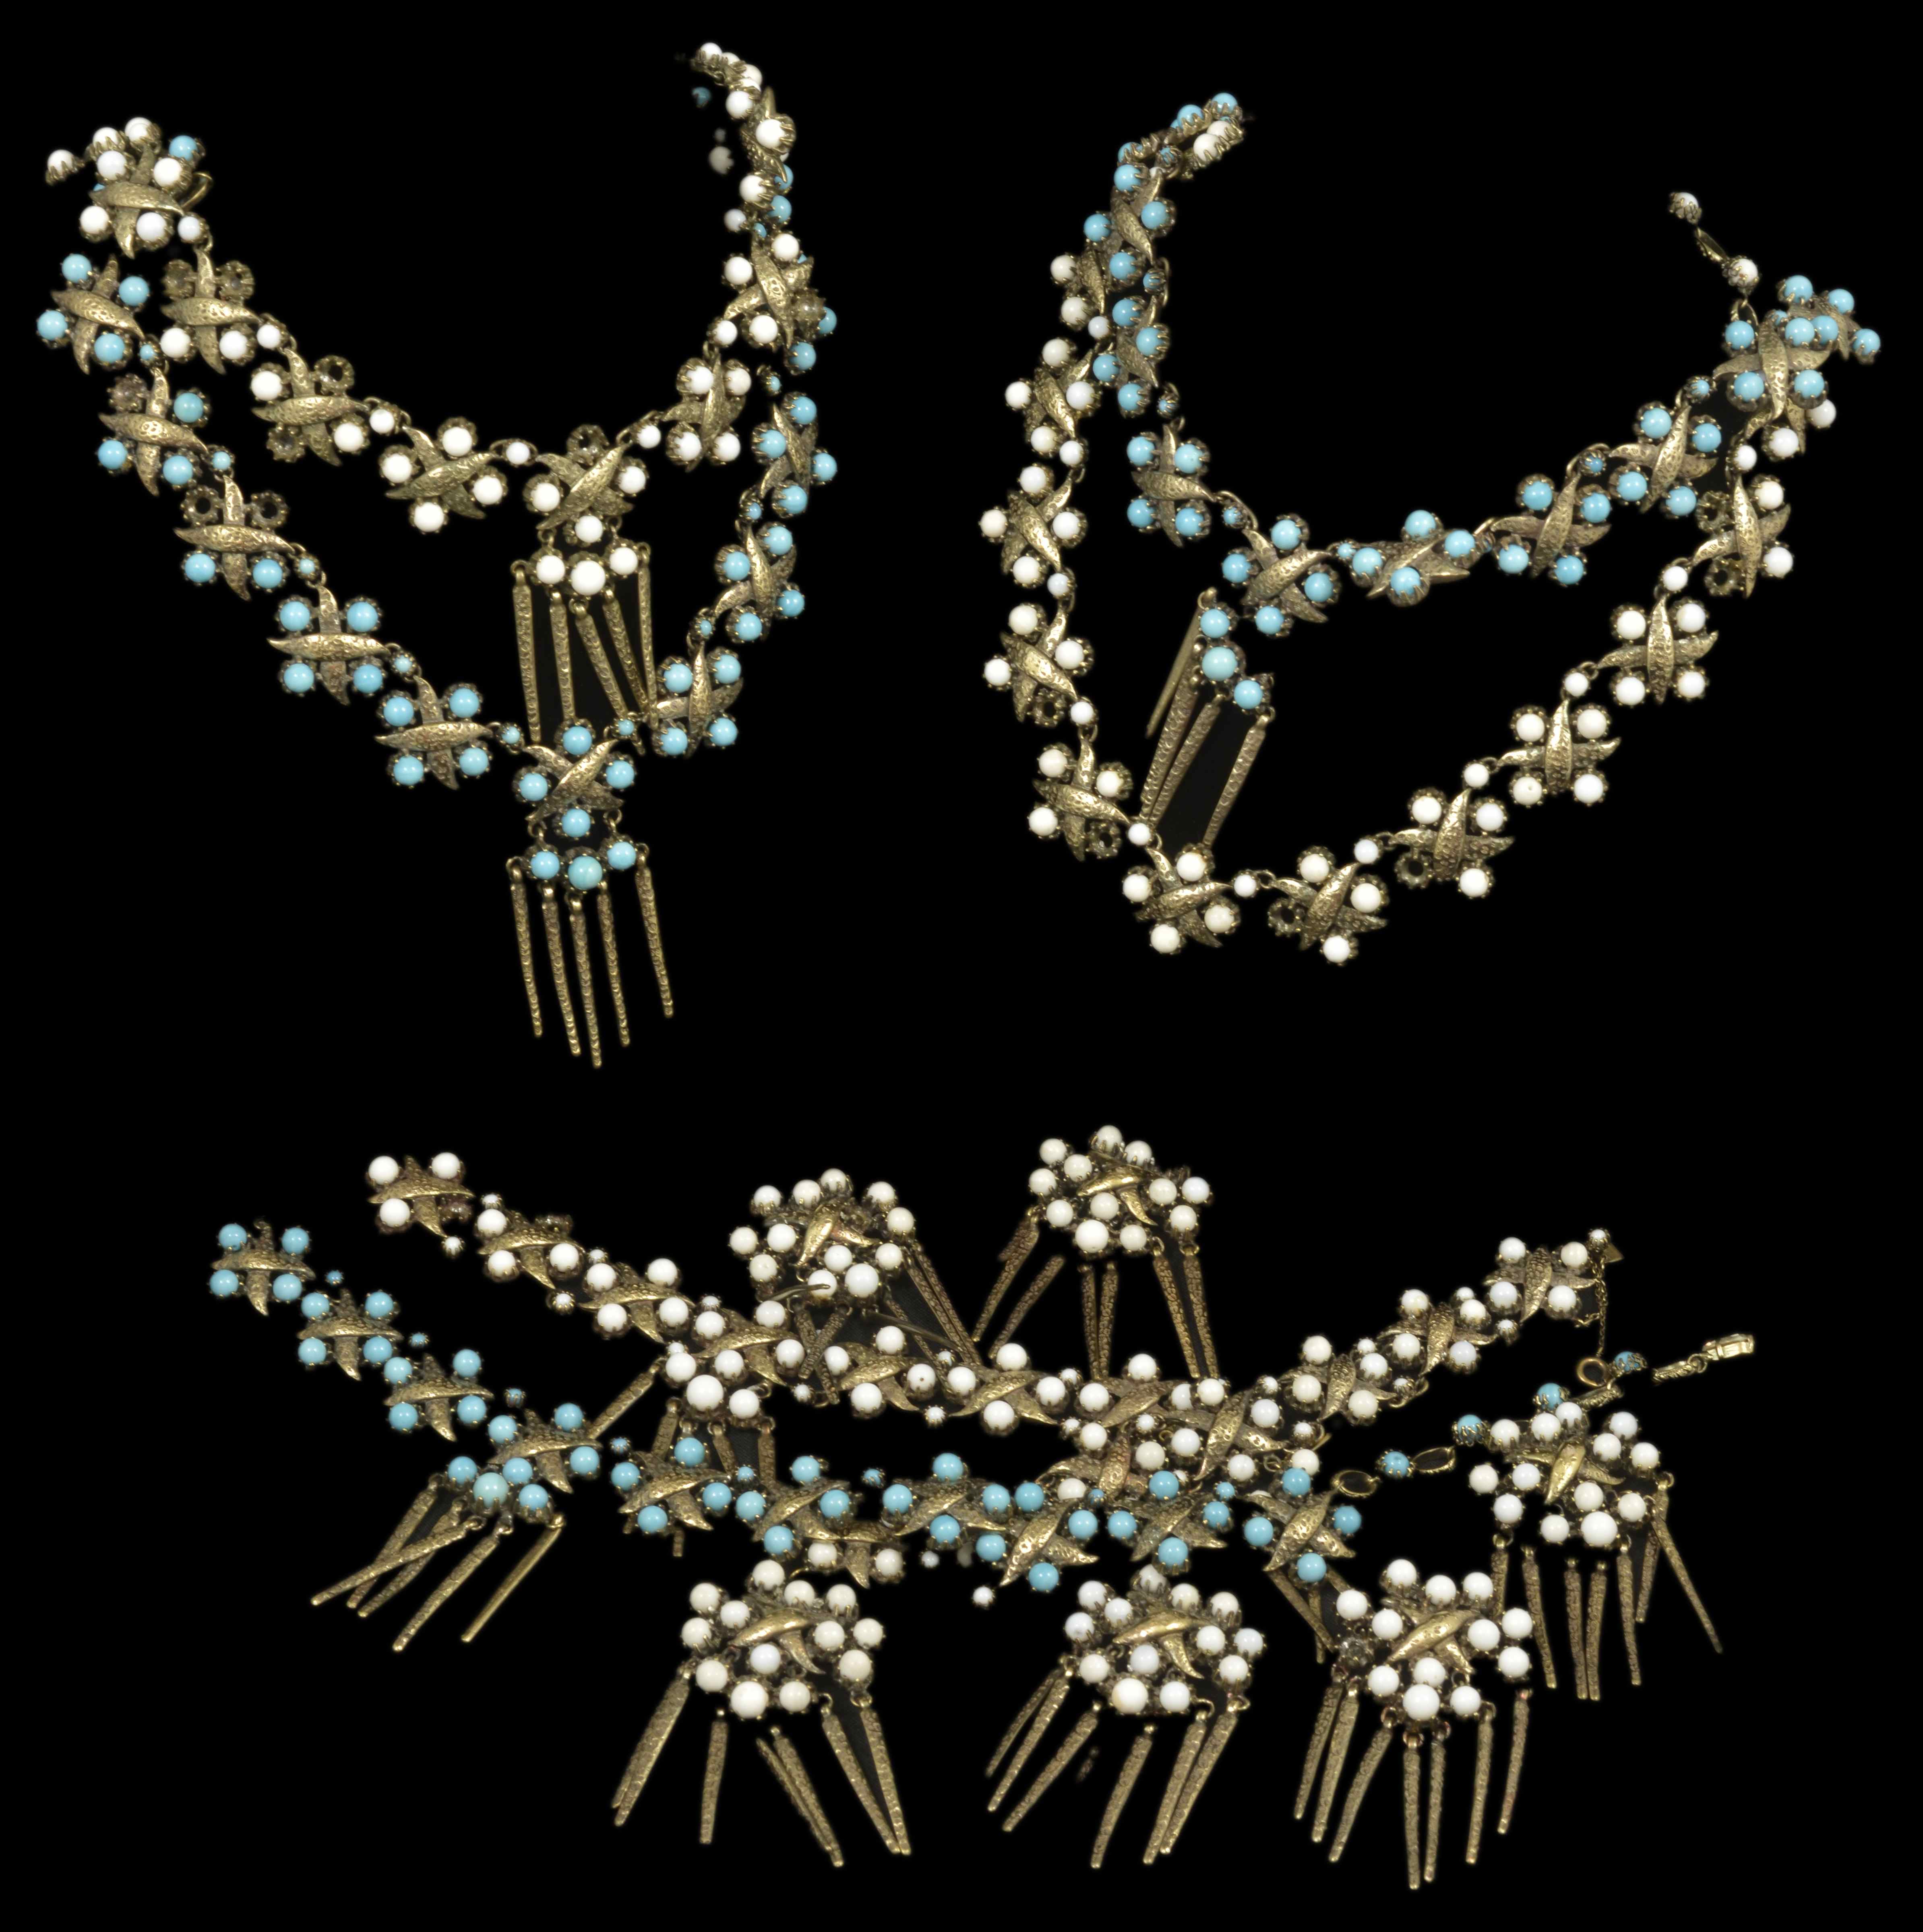 Christian Dior by Mitchel Maer 1954-1957 A collection of vintage Dior necklaces, bracelets, earrings